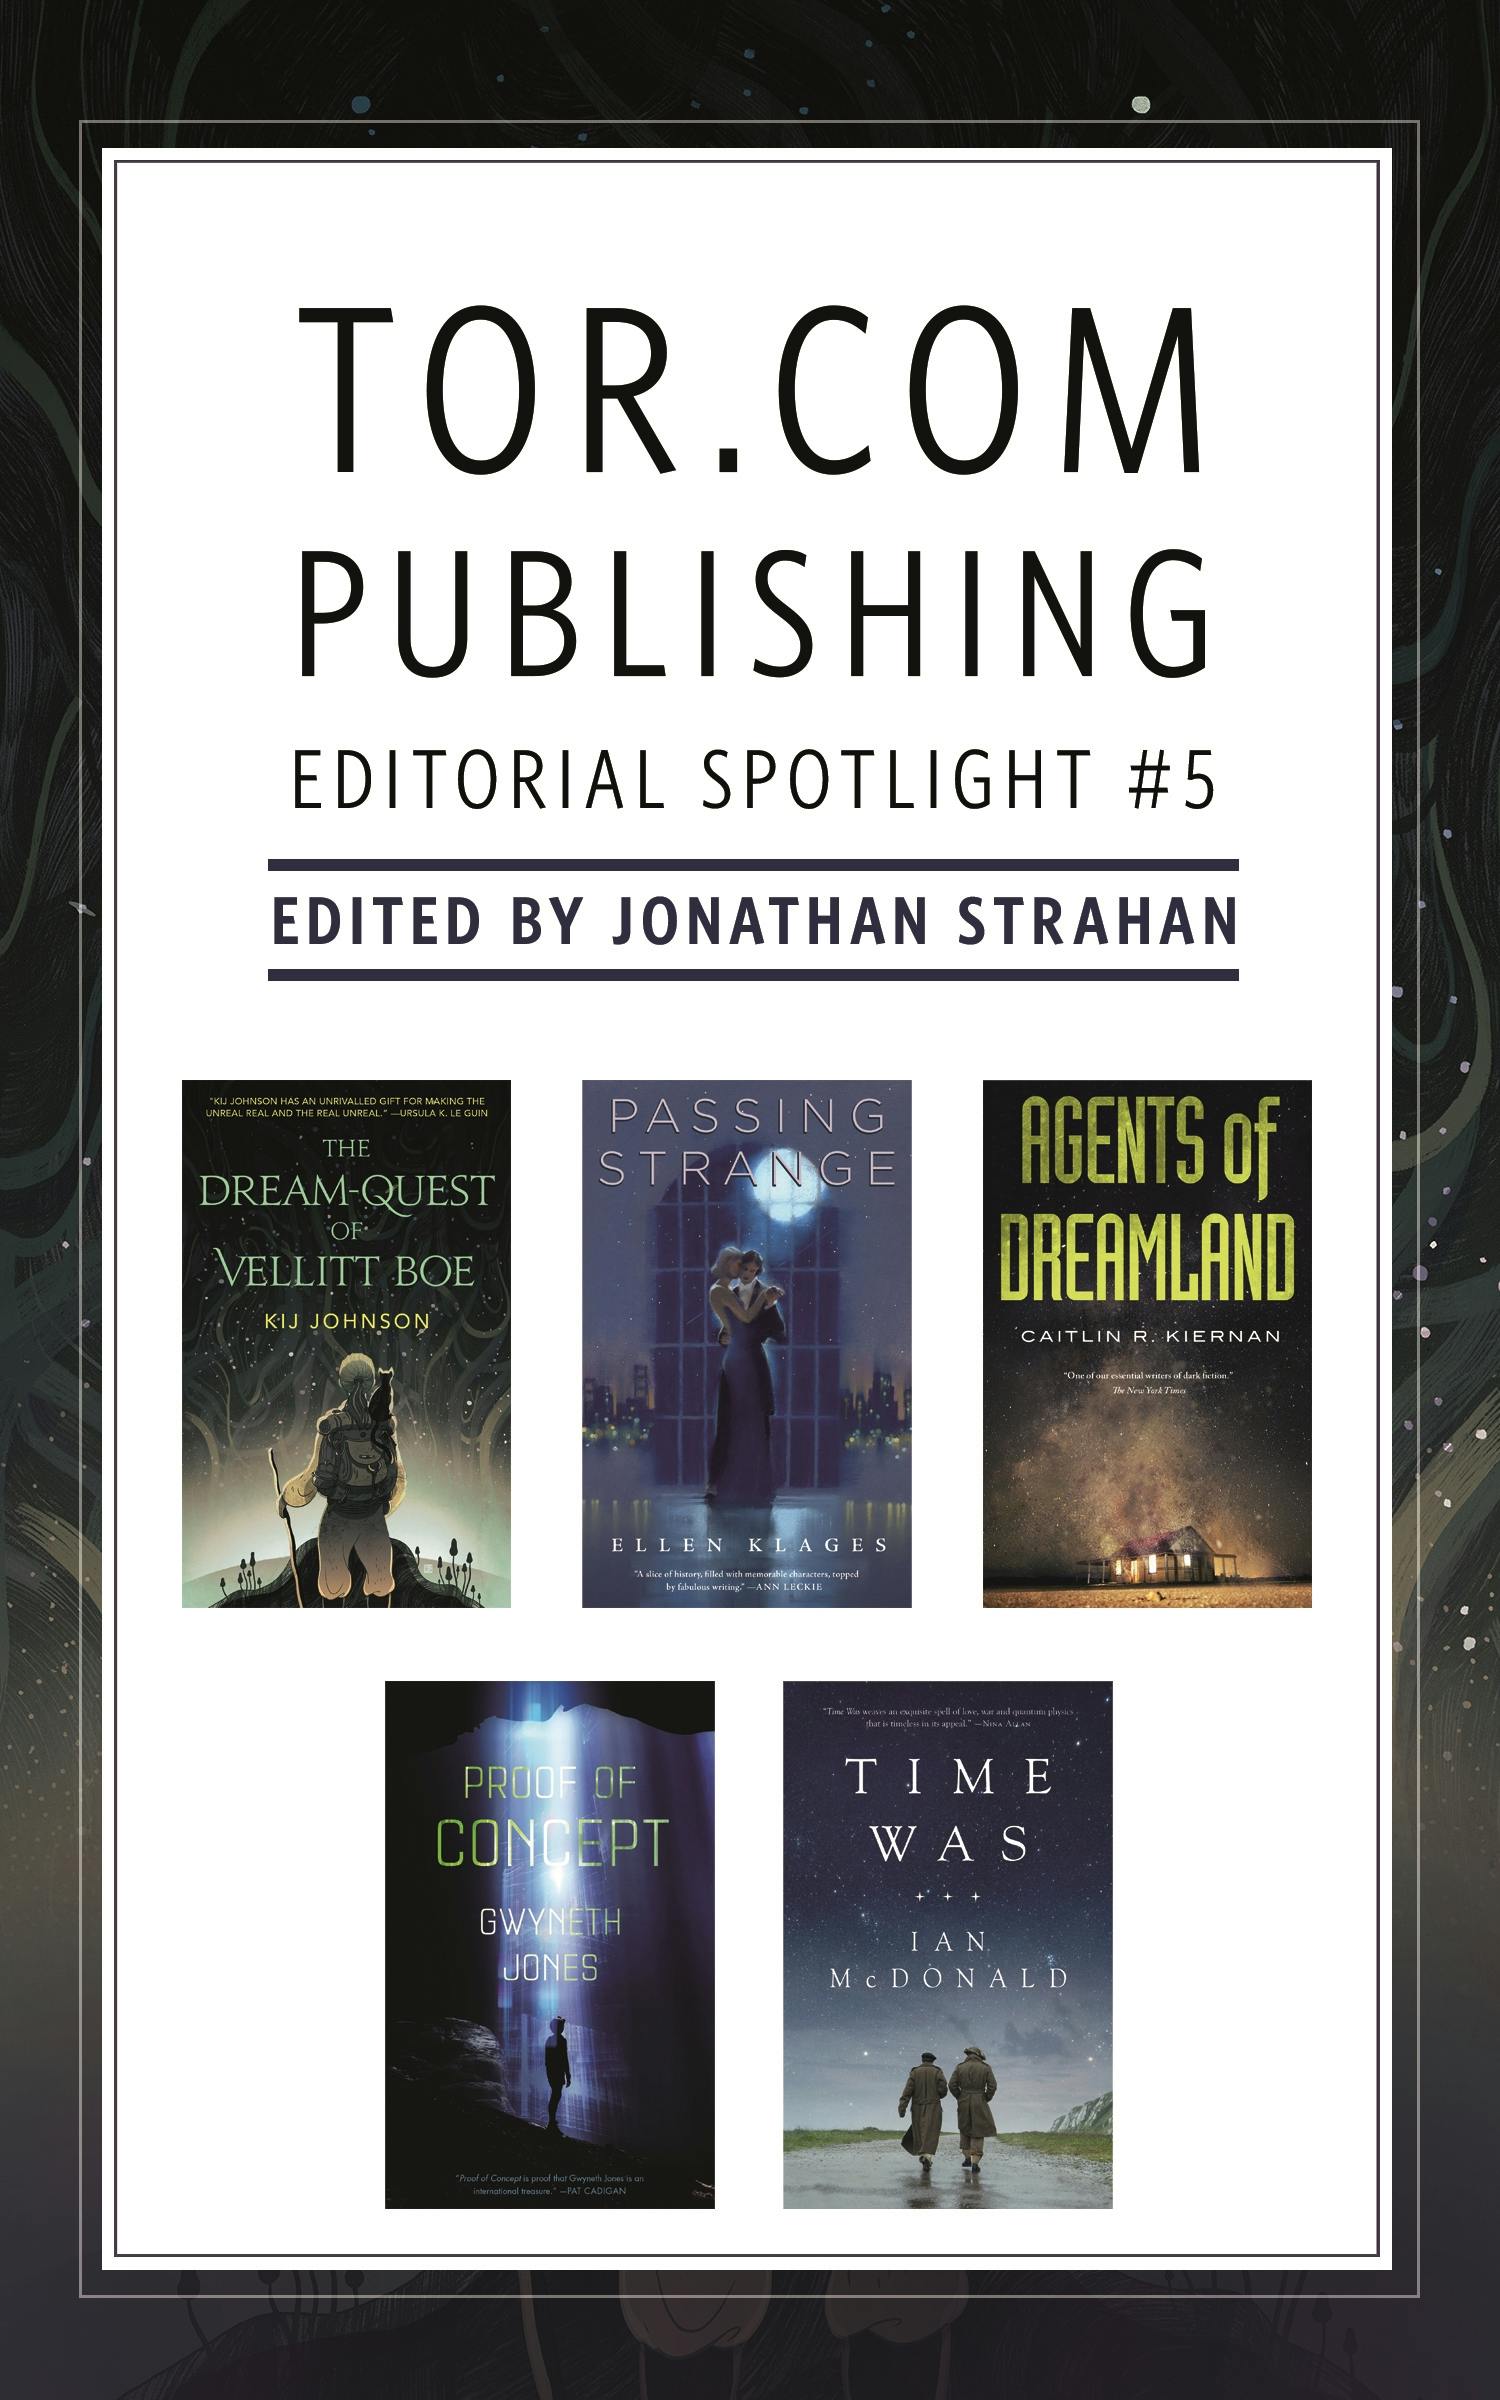 Cover for the book titled as: Tor.com Publishing Editorial Spotlight #5